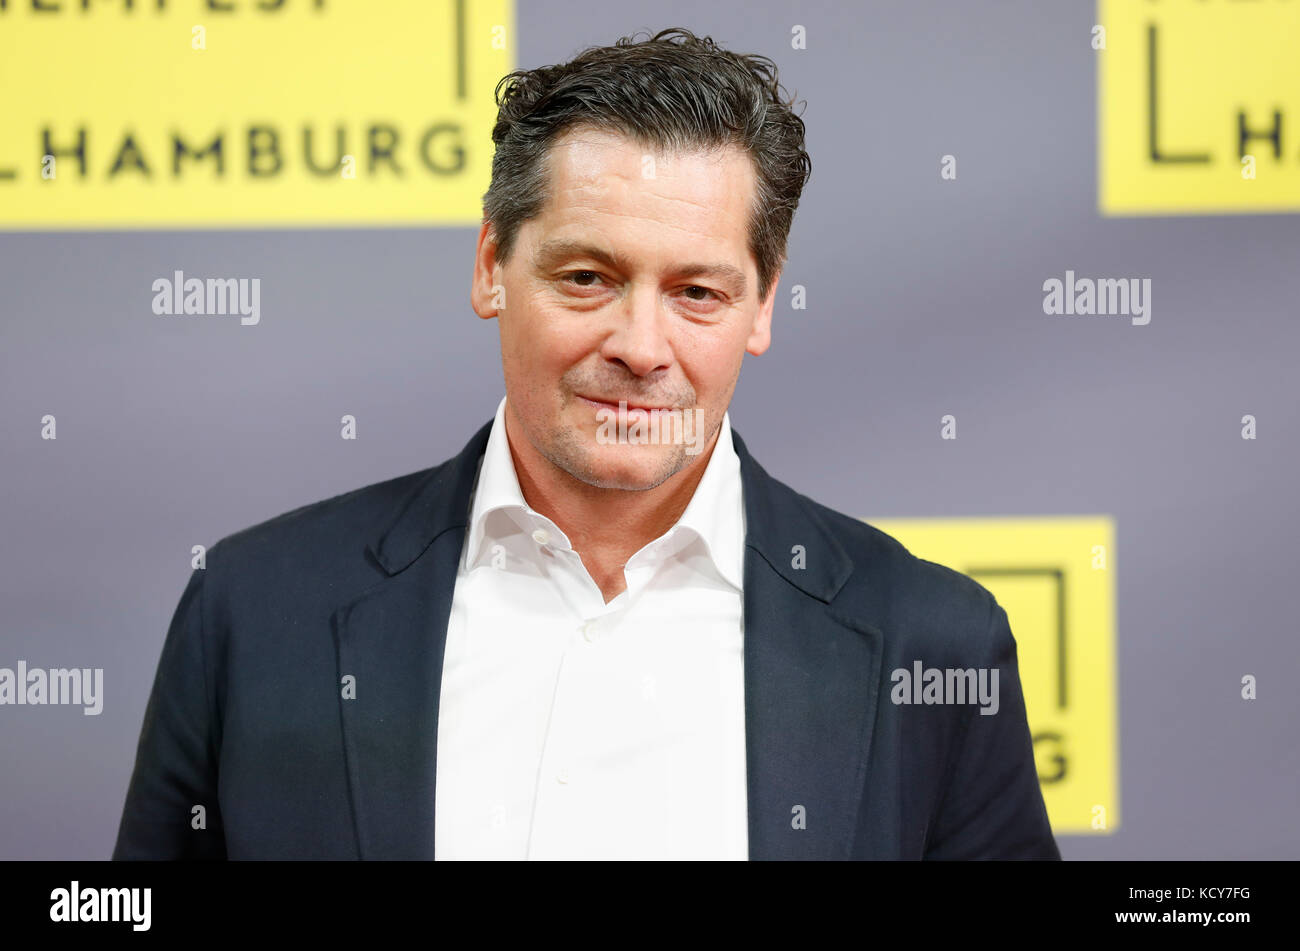 Hamburg, Germany. 7th Oct, 2017. The actor Fritz Karl arrives for the  German premiere of the film "Reich oder tot" during the Hamburg Film  Festival in Hamburg, Germany, 7 October 2017. Credit: